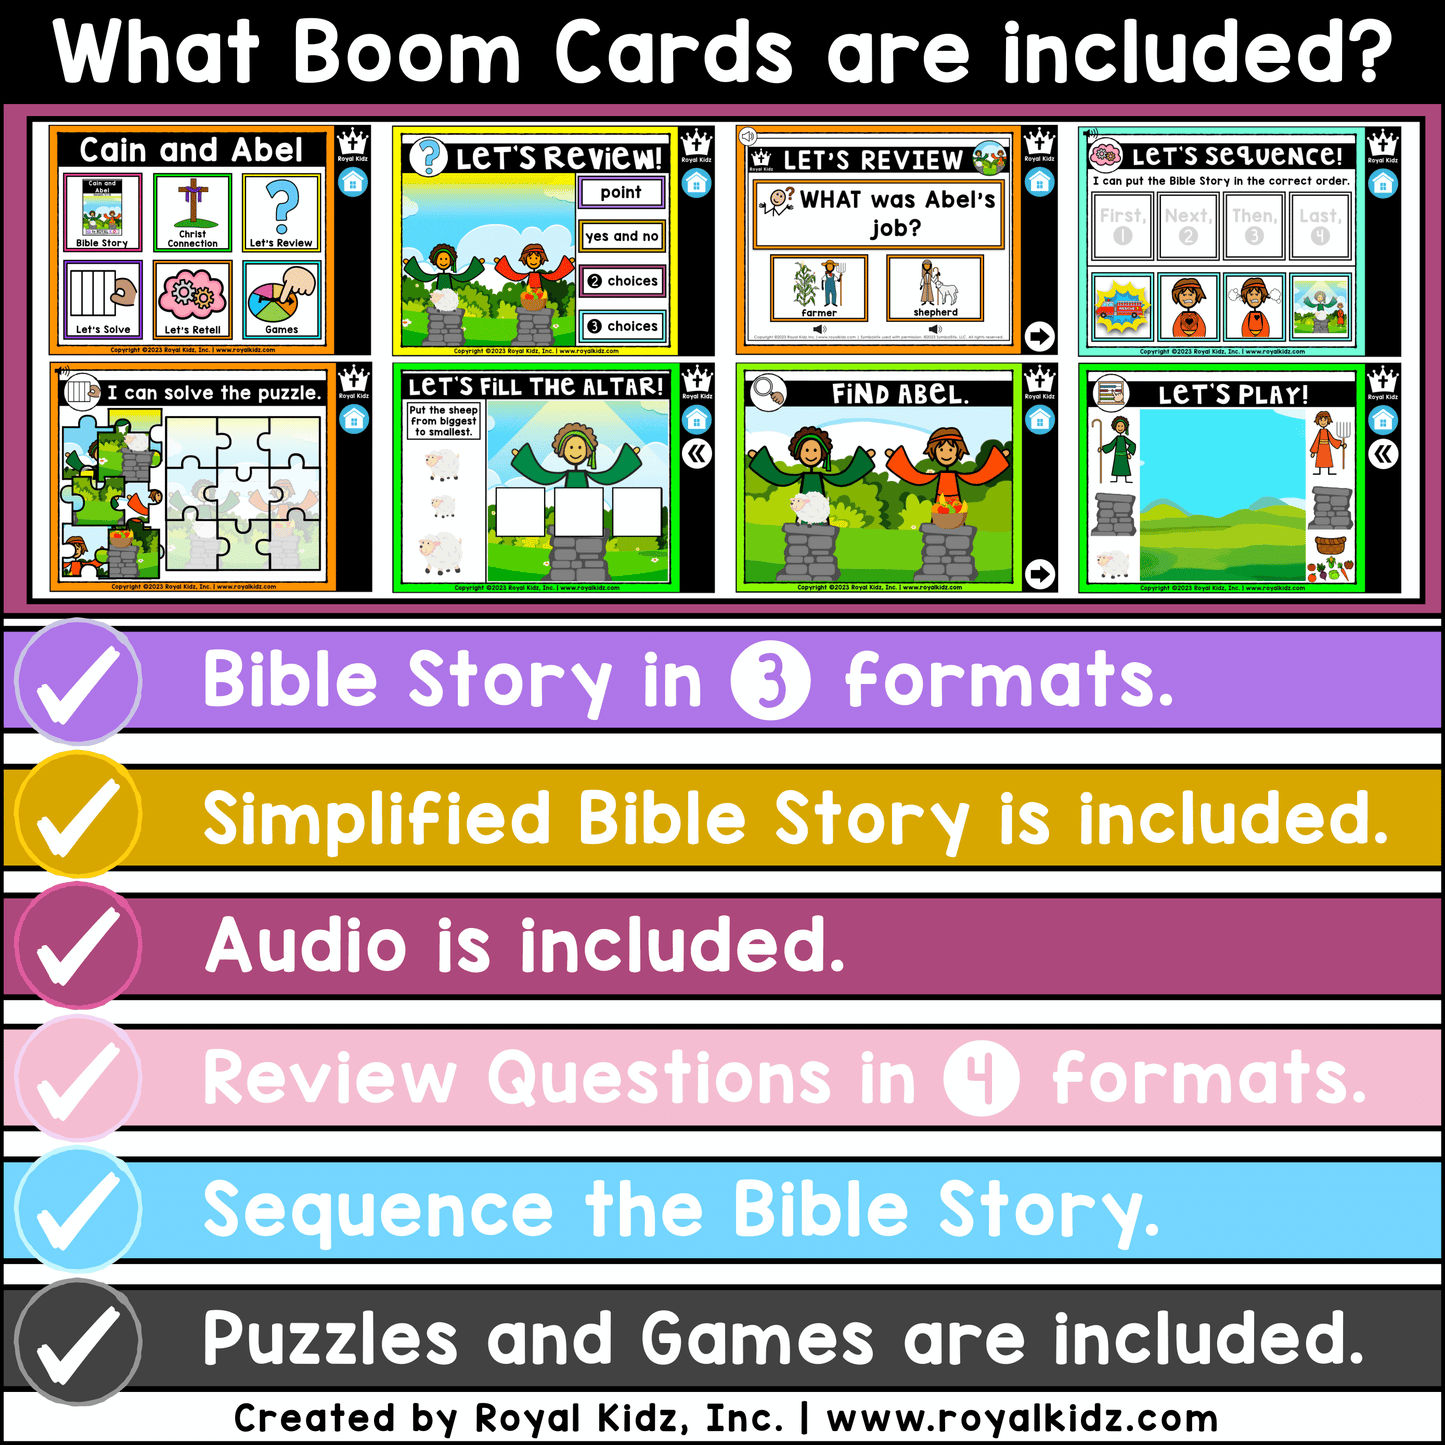 Cain and Abel Bible Lesson WITH Symbol Supports + Bible Boom Cards™ UNIT 1